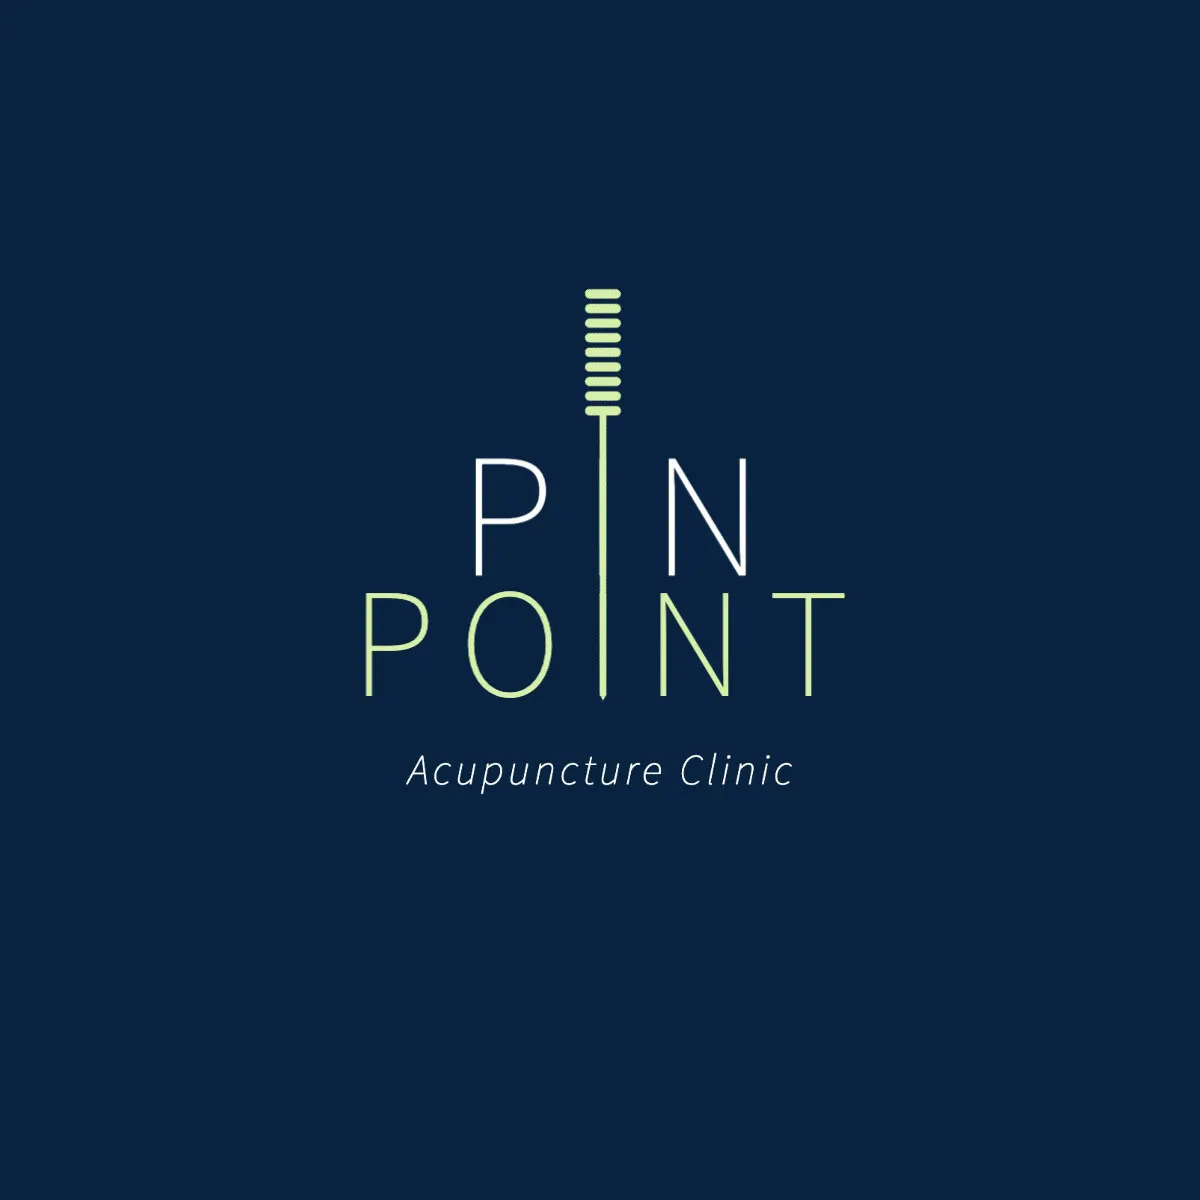 Blue Green & White Minimal PinPoint Acupuncture Clinic Health Logo